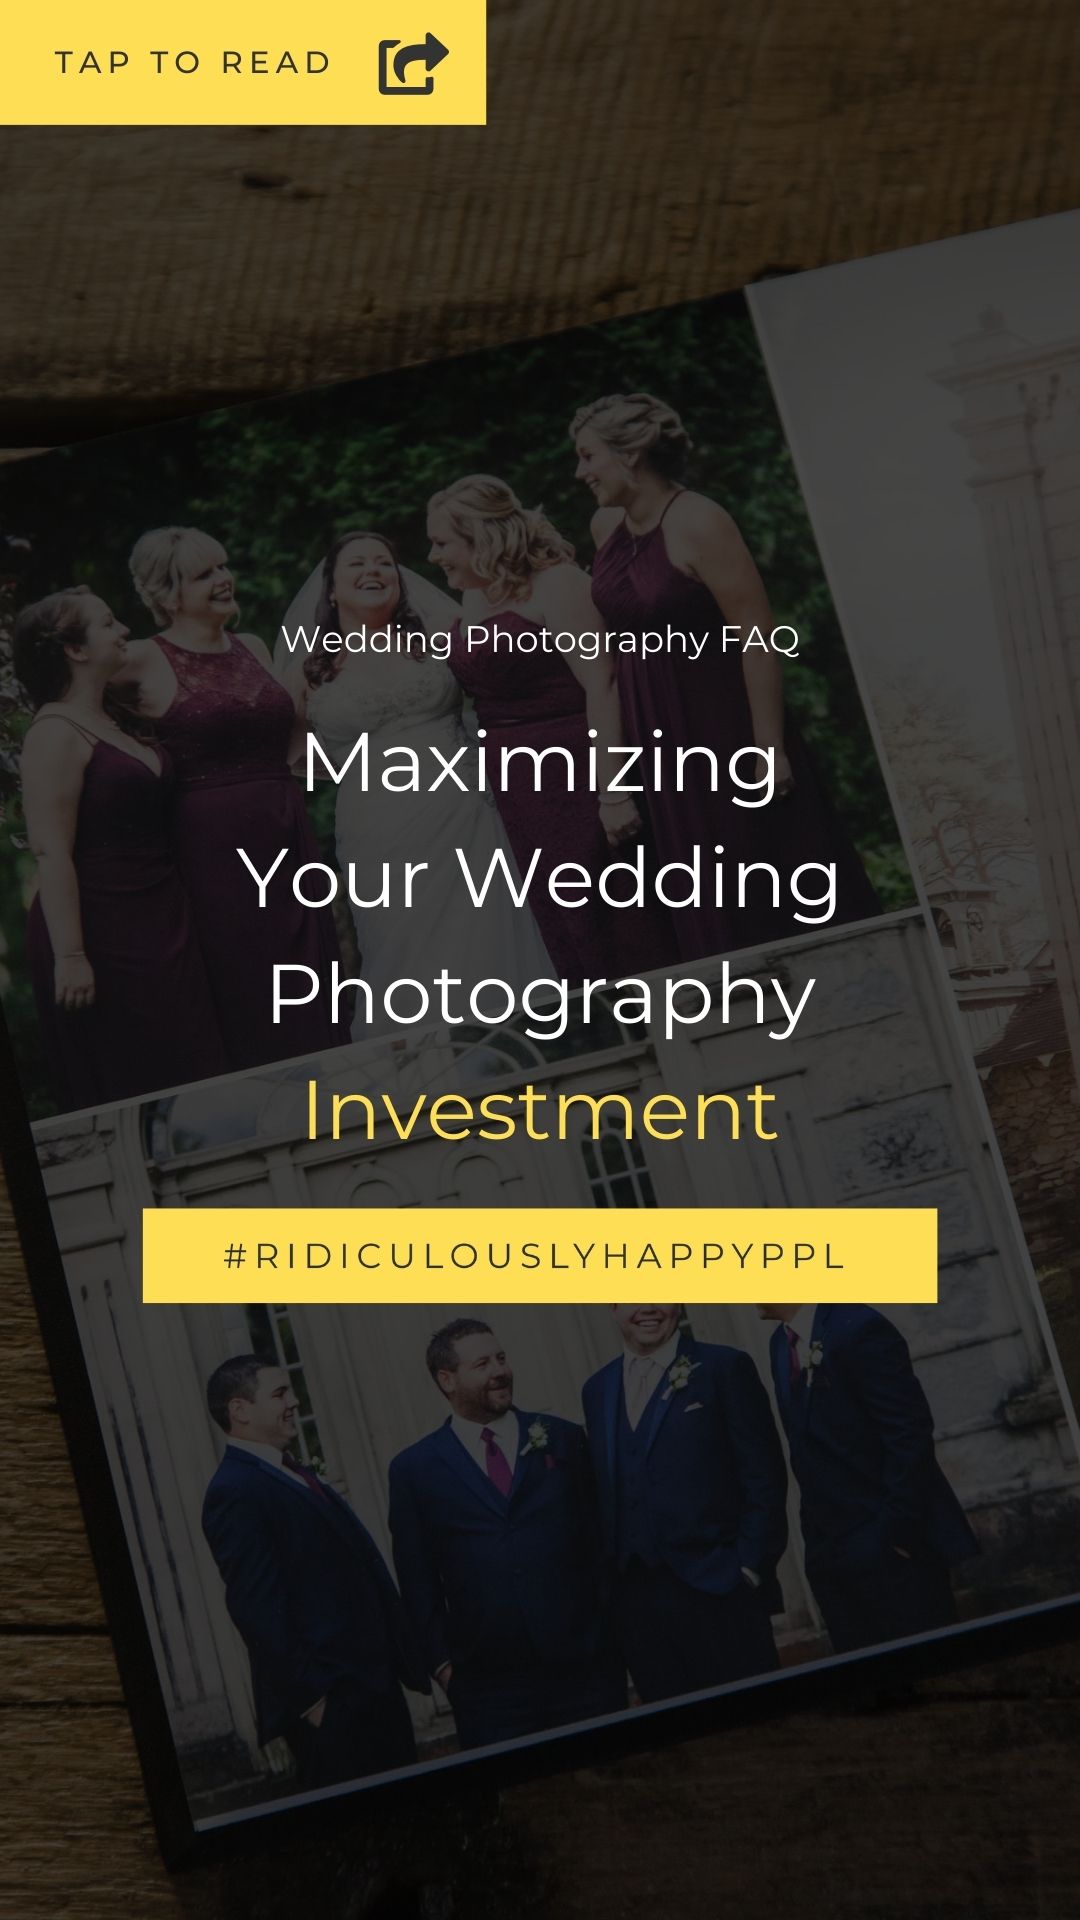 How Do We Make The Most Of Our Wedding Photography Investment?